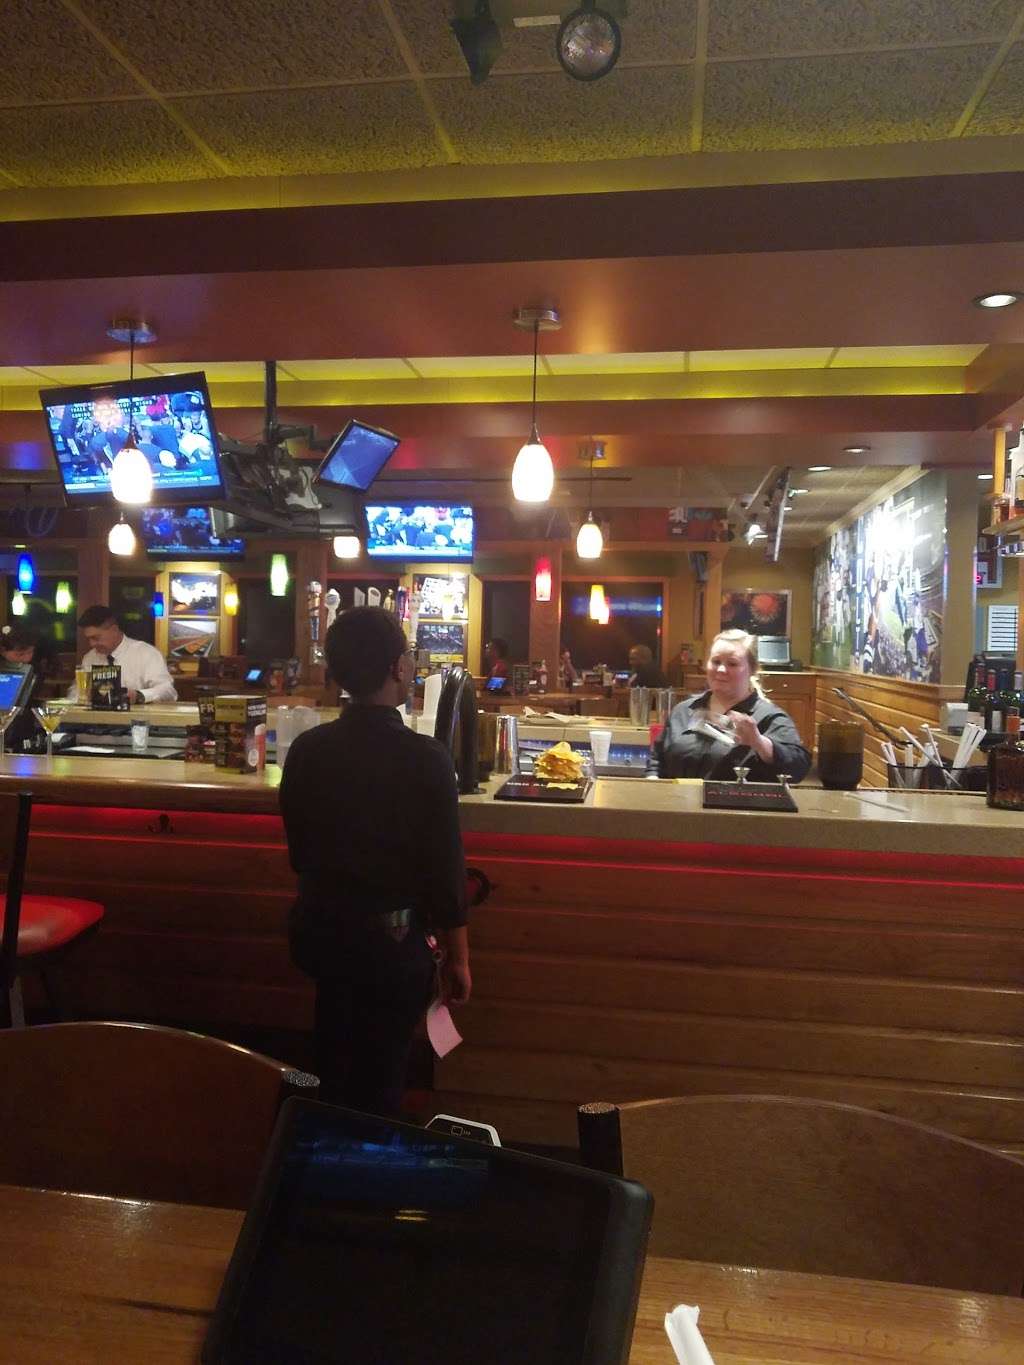 Applebees Grill + Bar | 6110 E 82nd St, Indianapolis, IN 46250 | Phone: (317) 577-8250